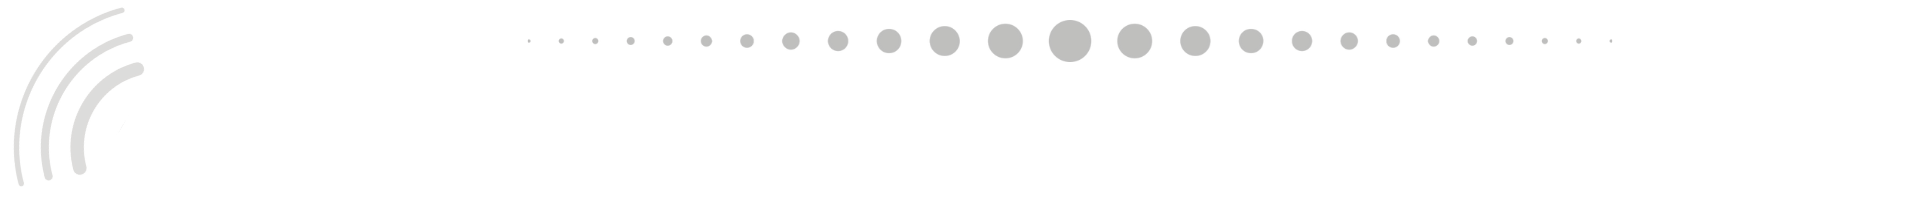 Three sound waves getting smaller from left to right, series of dots